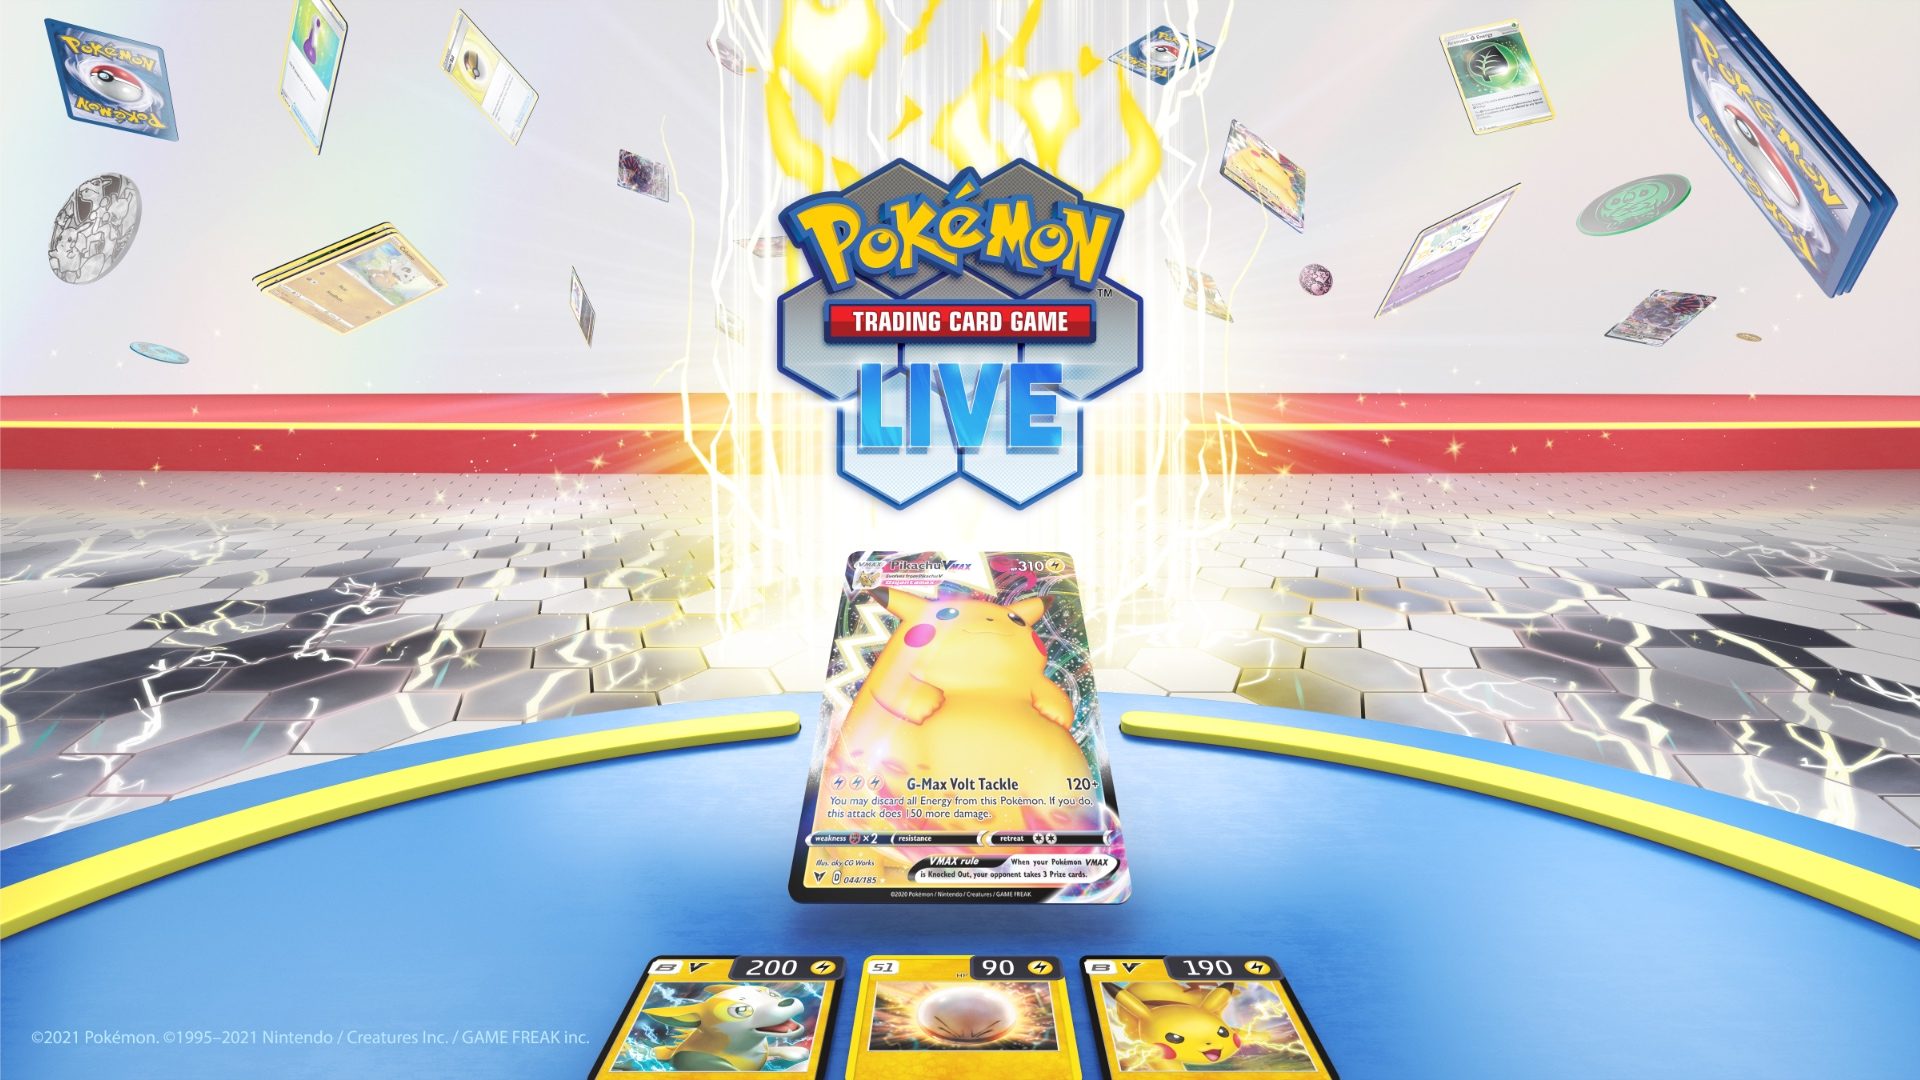 A new Pokemon trading card game is coming to mobile VG247